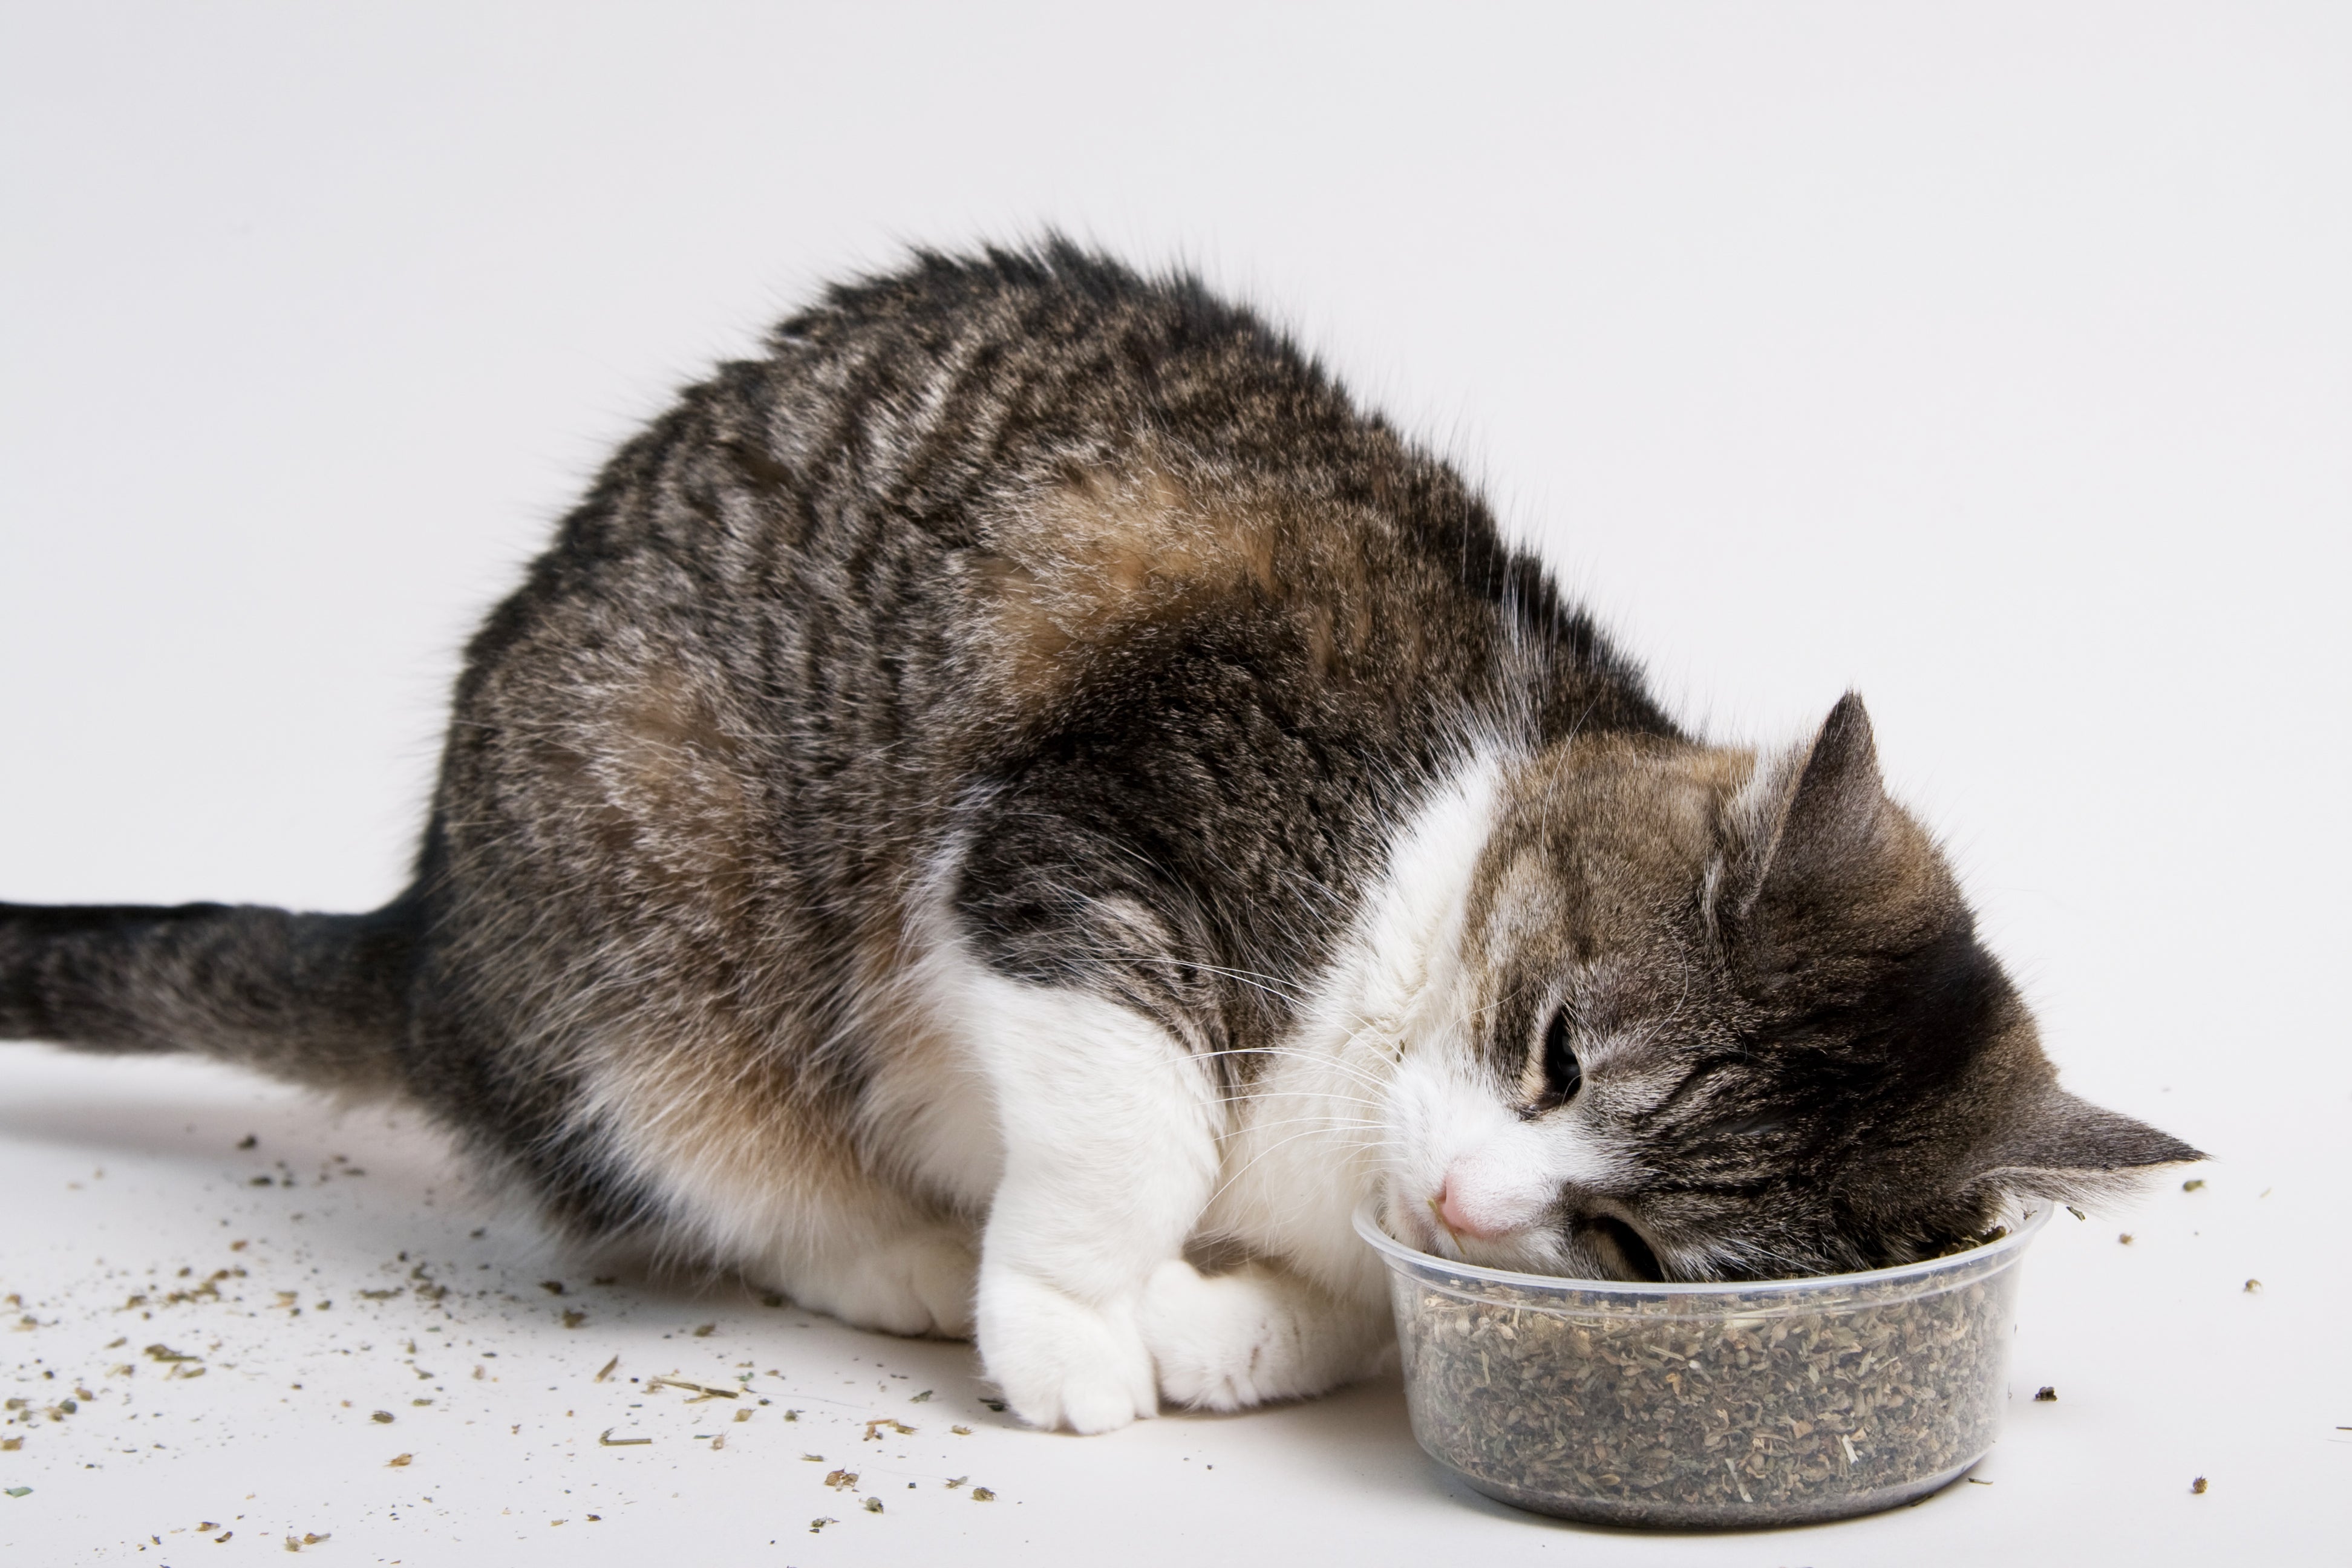 How Does Catnip Work Its Magic on Cats? - Scientific American